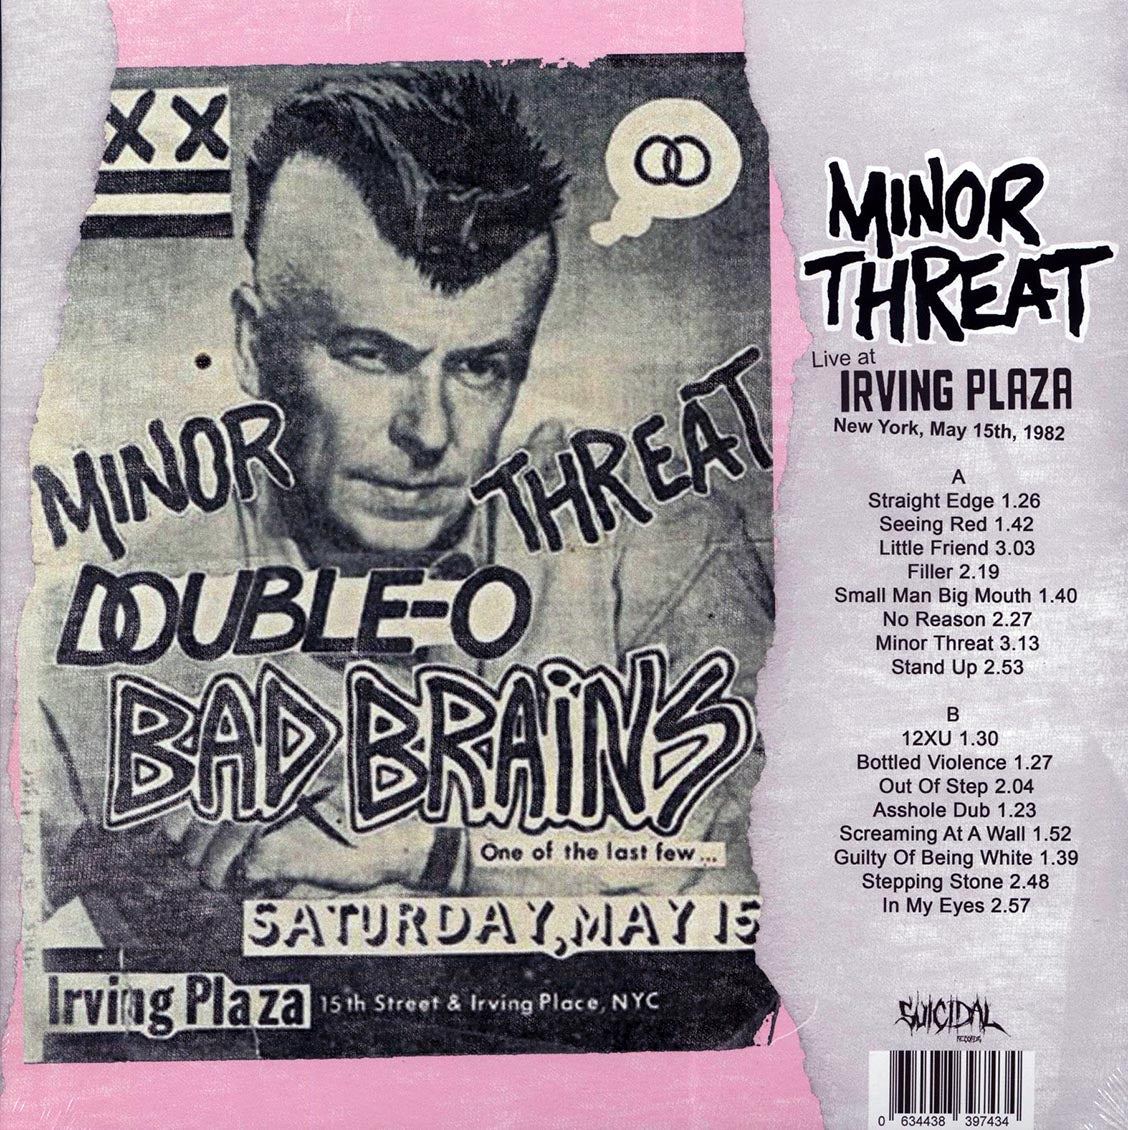 Minor Threat - Live at Irving Plaza, New York, My 15th, 1982 [2022 Unofficial White] [New Vinyl Record LP]